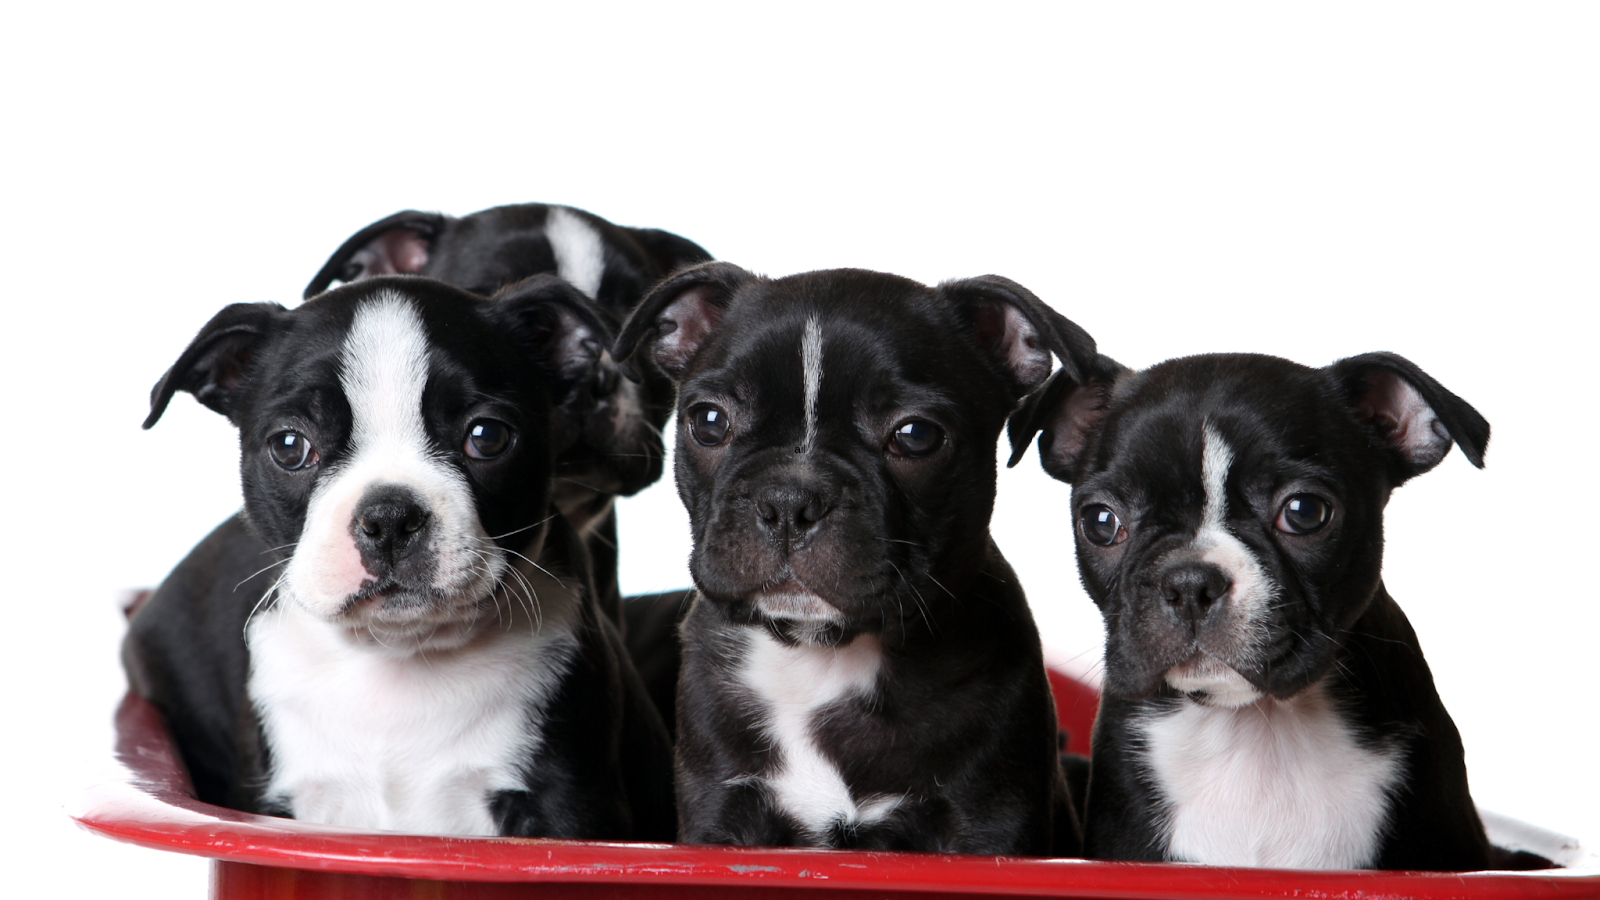 Four Boston Terrier Puppies with ears still developing